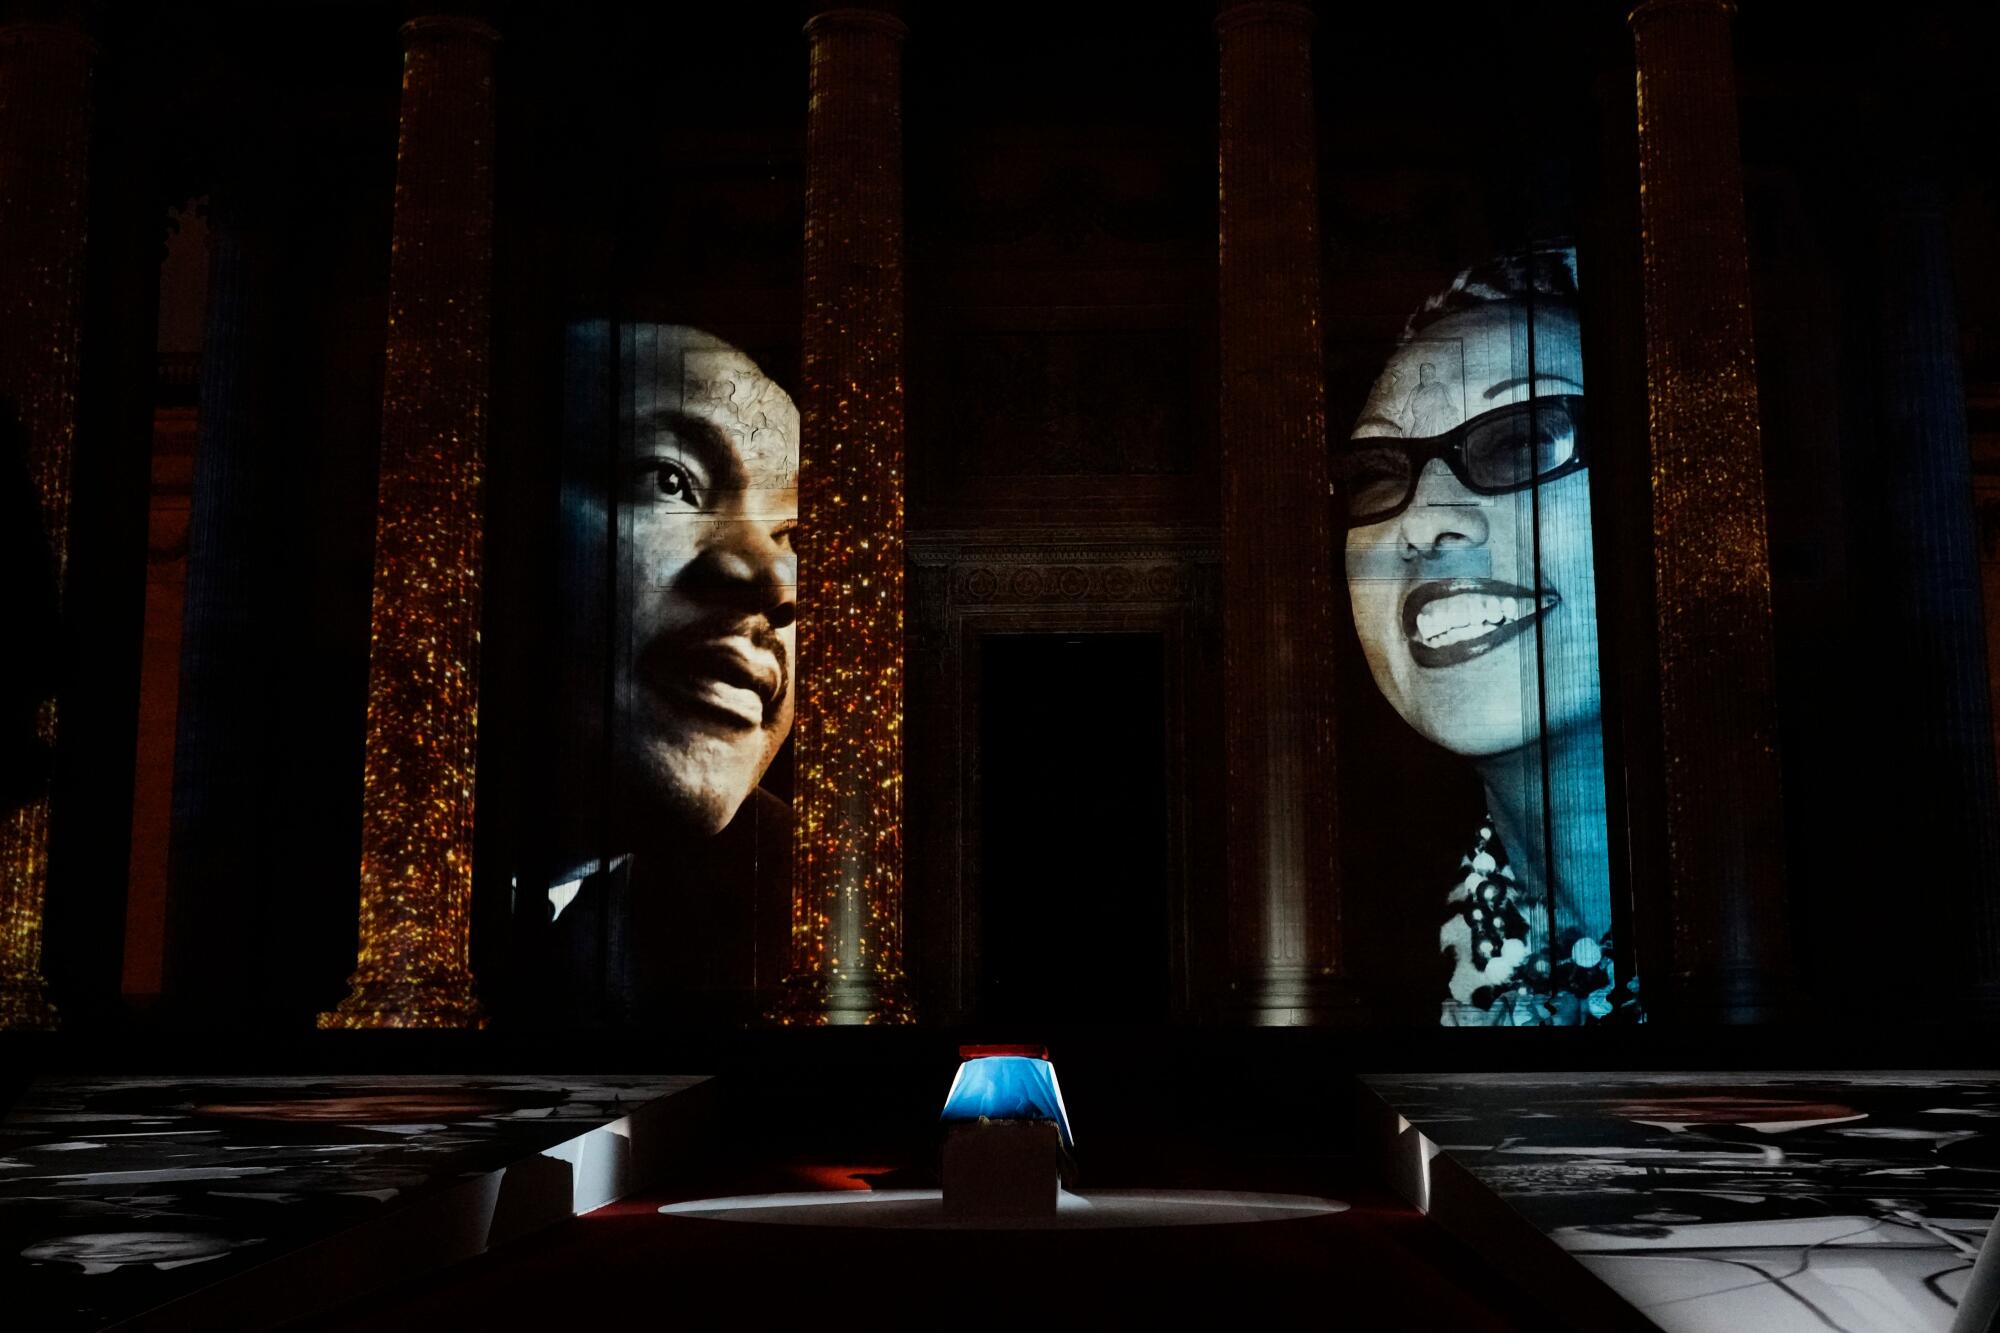 Images of Josephine Baker and the Rev. Martin Luther King Jr. are displayed during the ceremony.